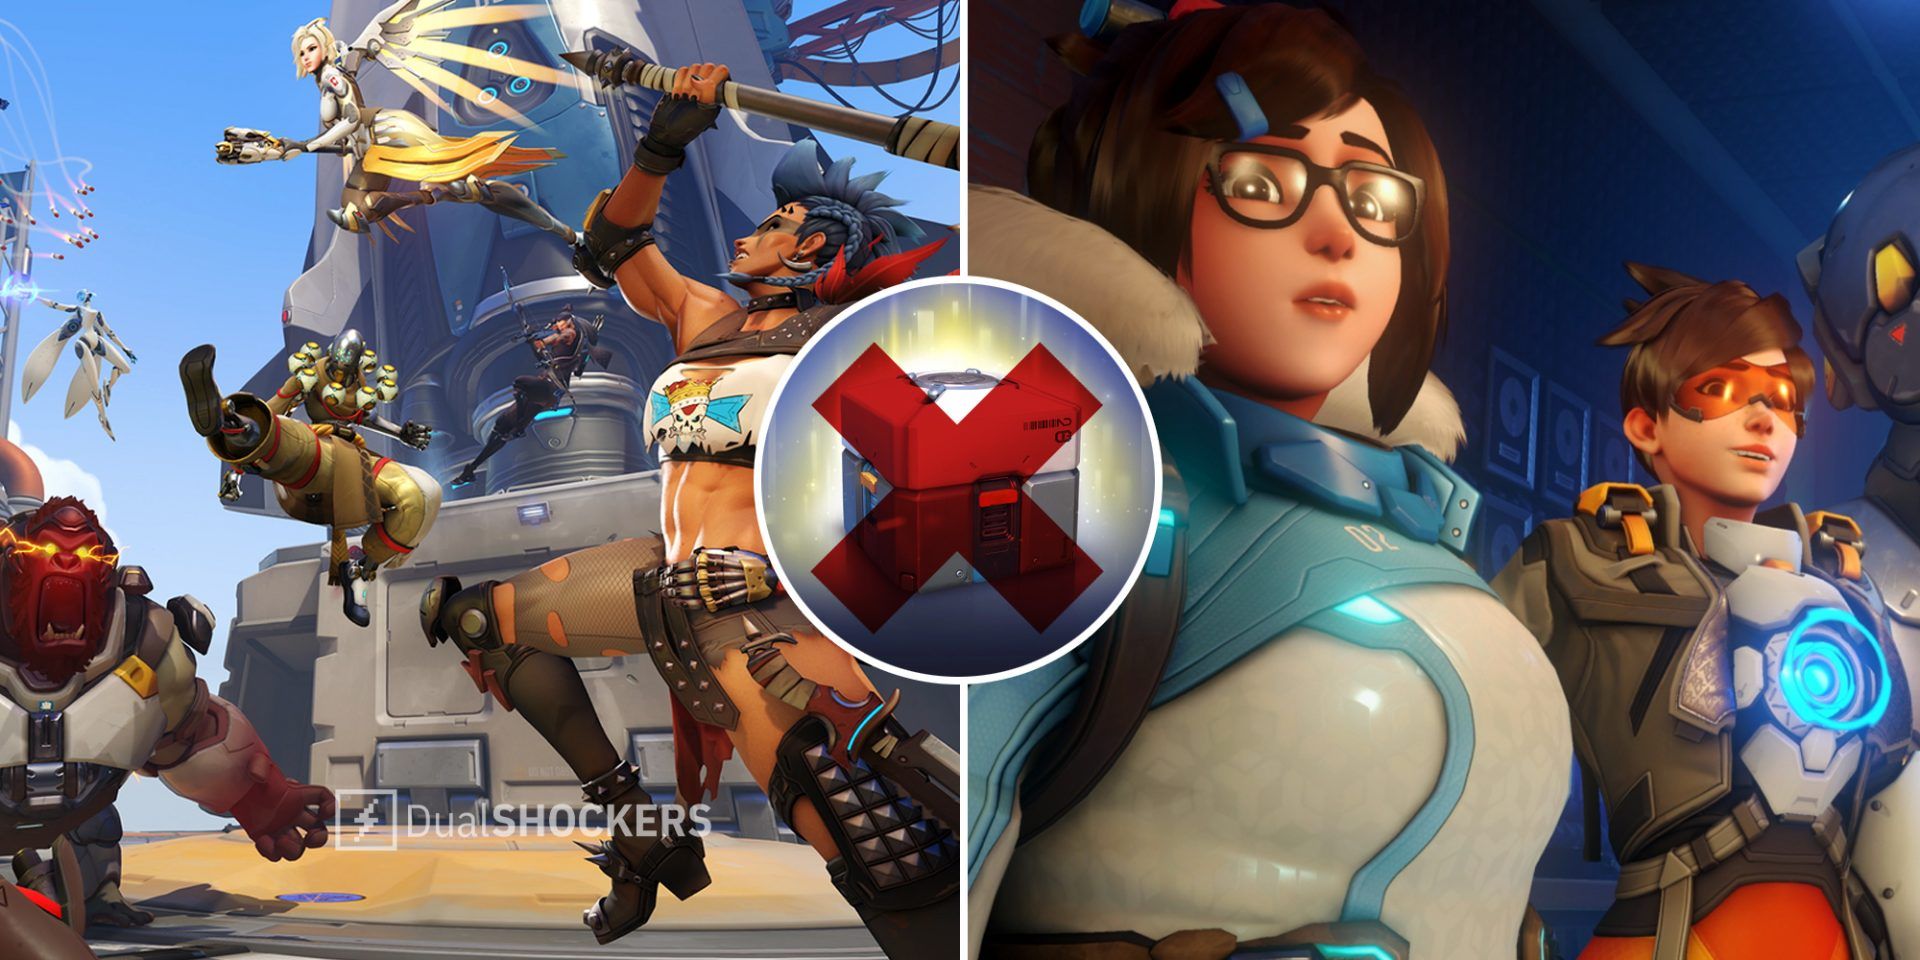 Overwatch 2 characters in the middle of a battle on left, Overwatch loot box with x through it in middle, Overwatch 2 Mei and Tracer on right